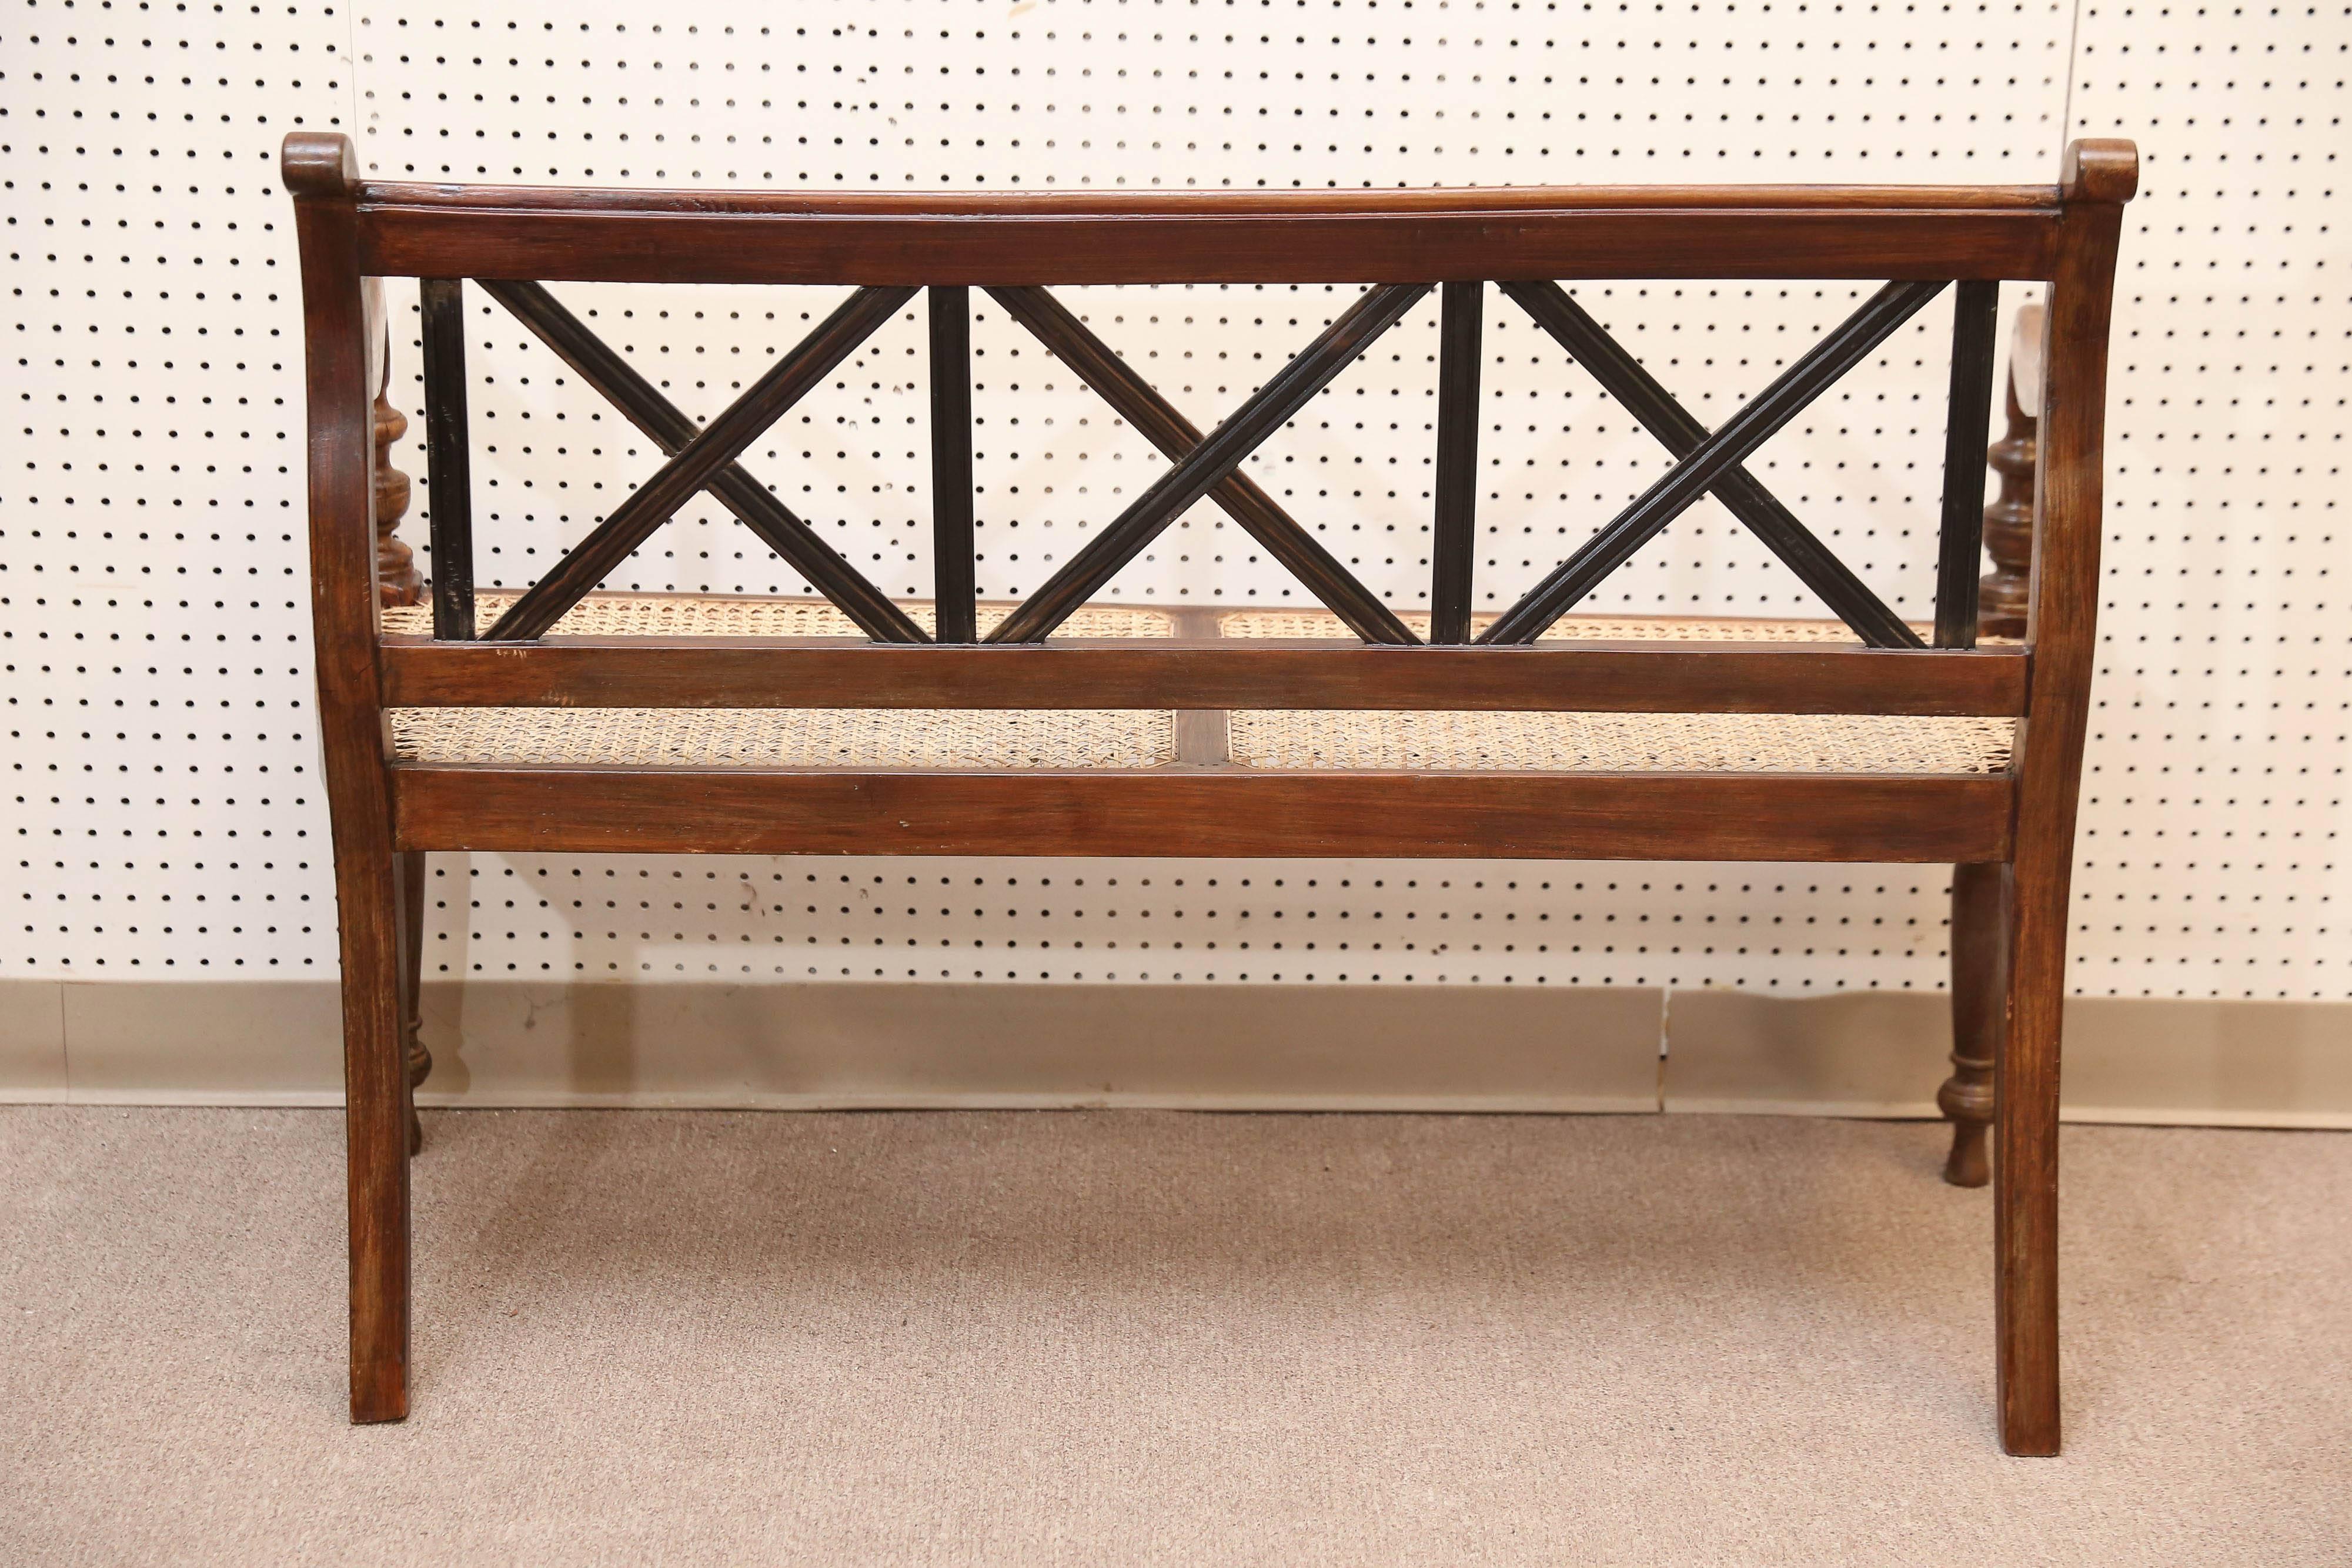 1920's Finely Crafted Dutch Colonial Teak Wood and Cane Bench from Sri Lanka 1